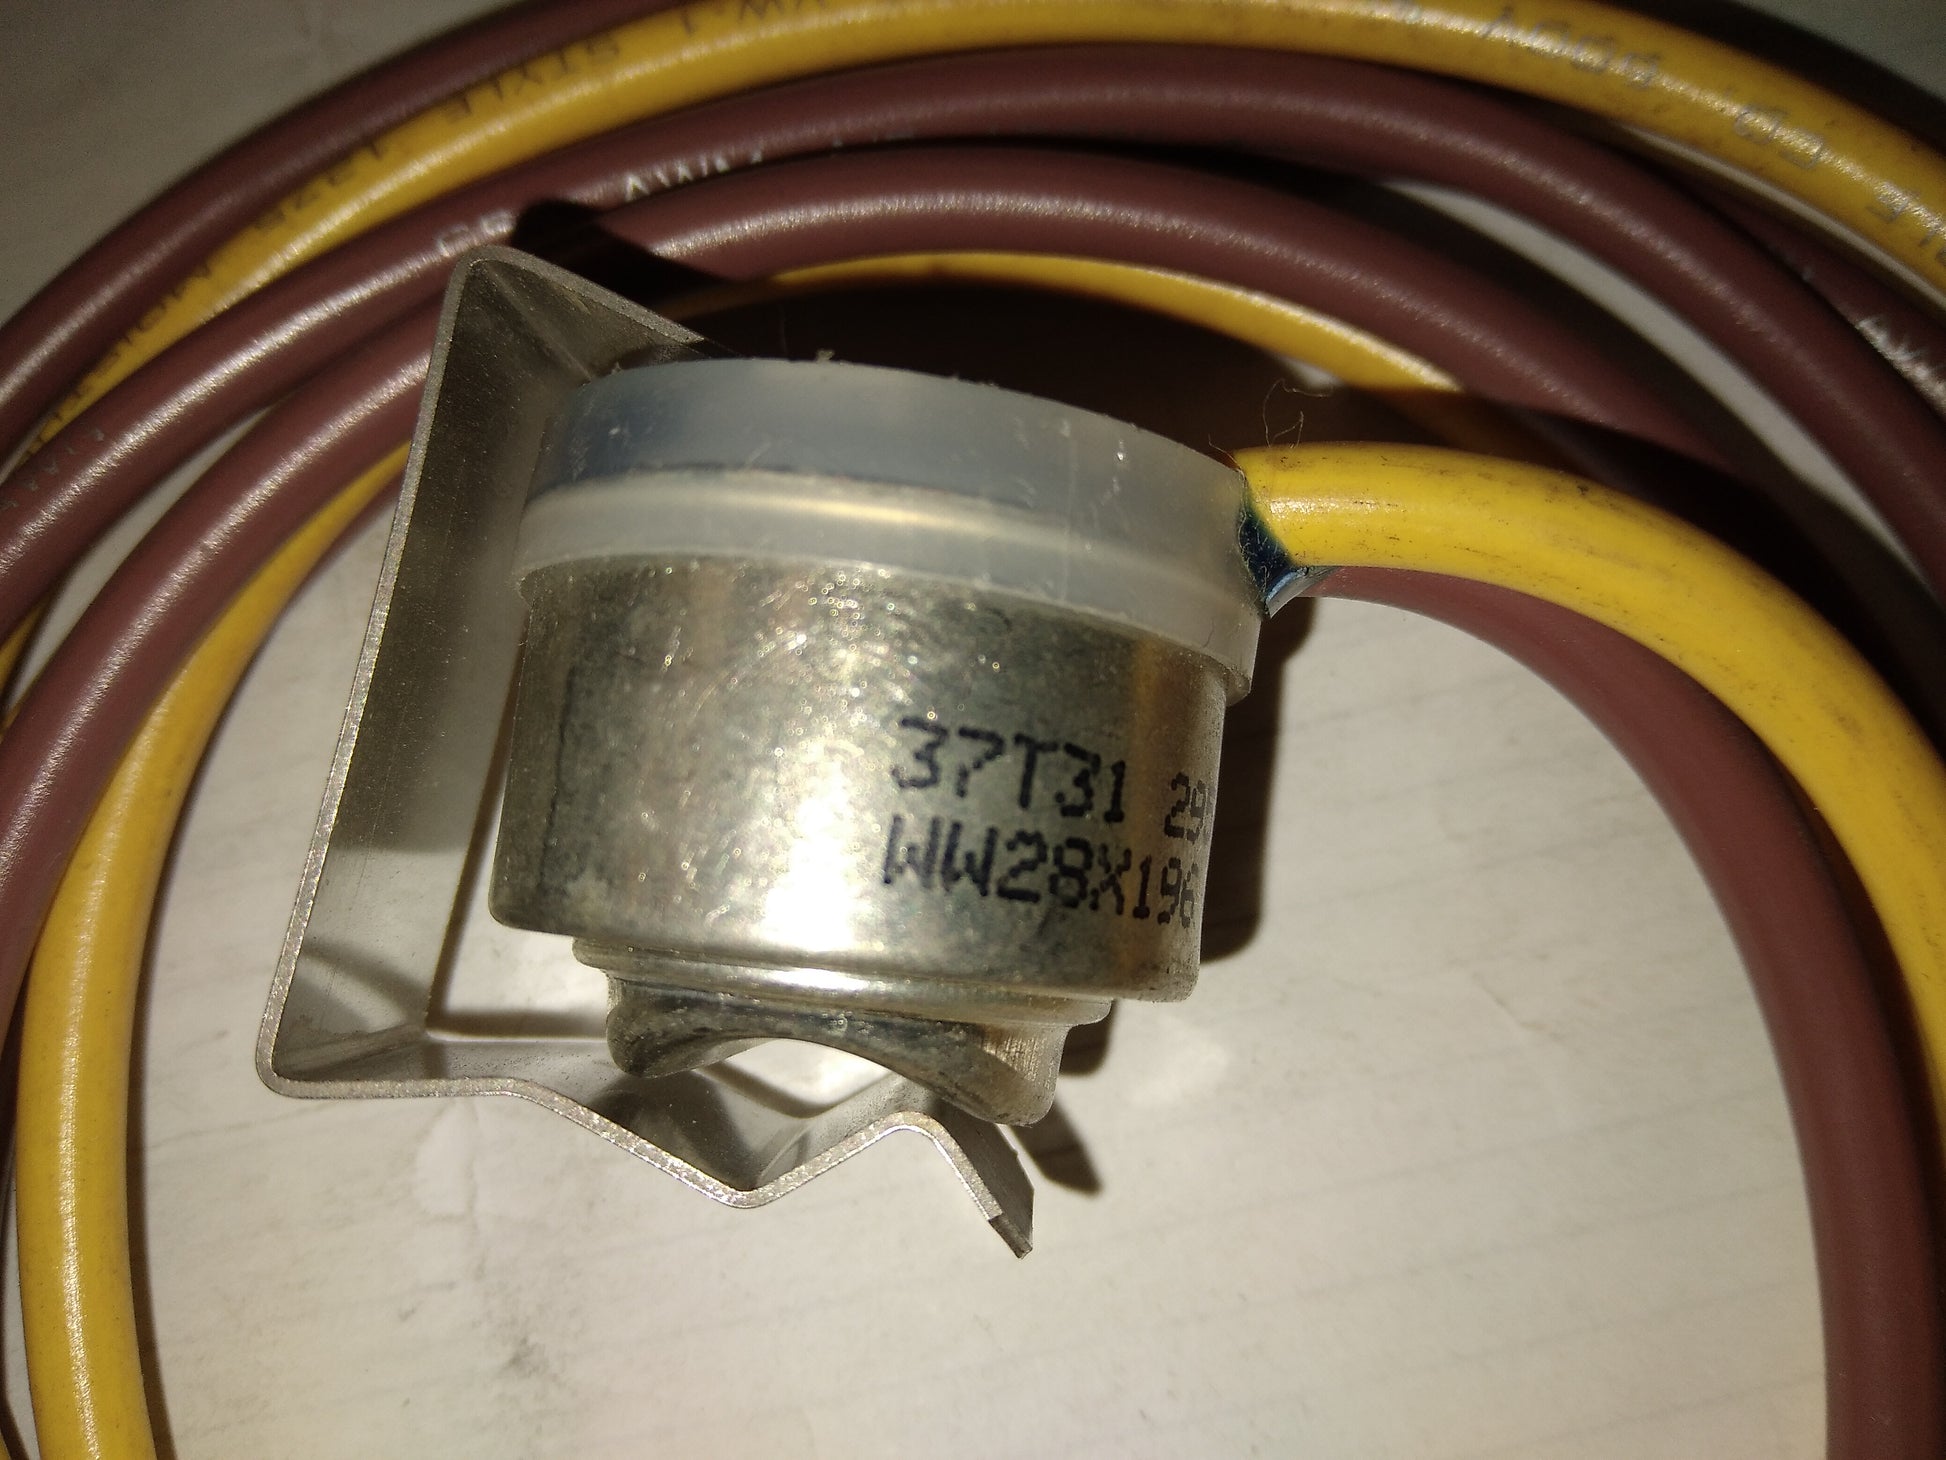 DEFROST CONTROL THERMOSTAT 33F OPEN 70F CLOSED 